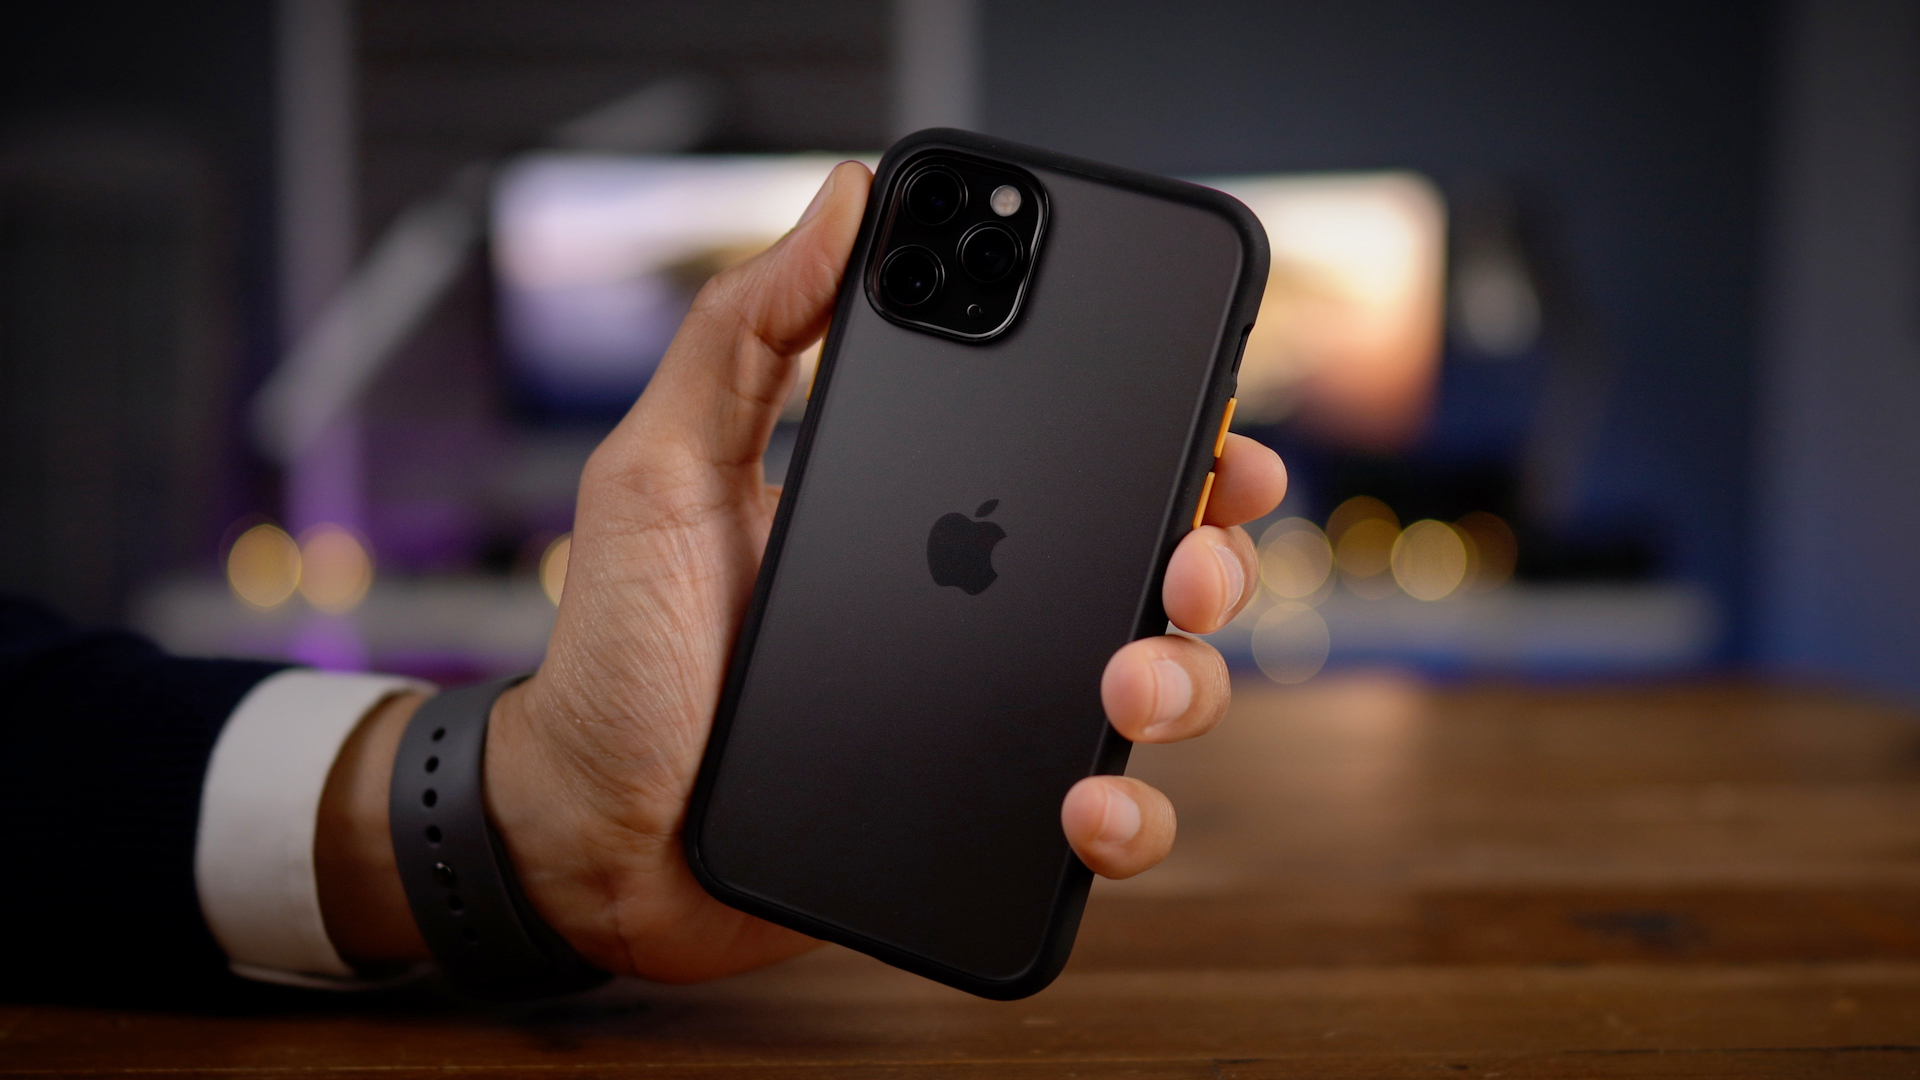 Skæbne Almindelig liter Cases for iPhone 11 from Bare in our early Black Friday sale - 9to5Mac